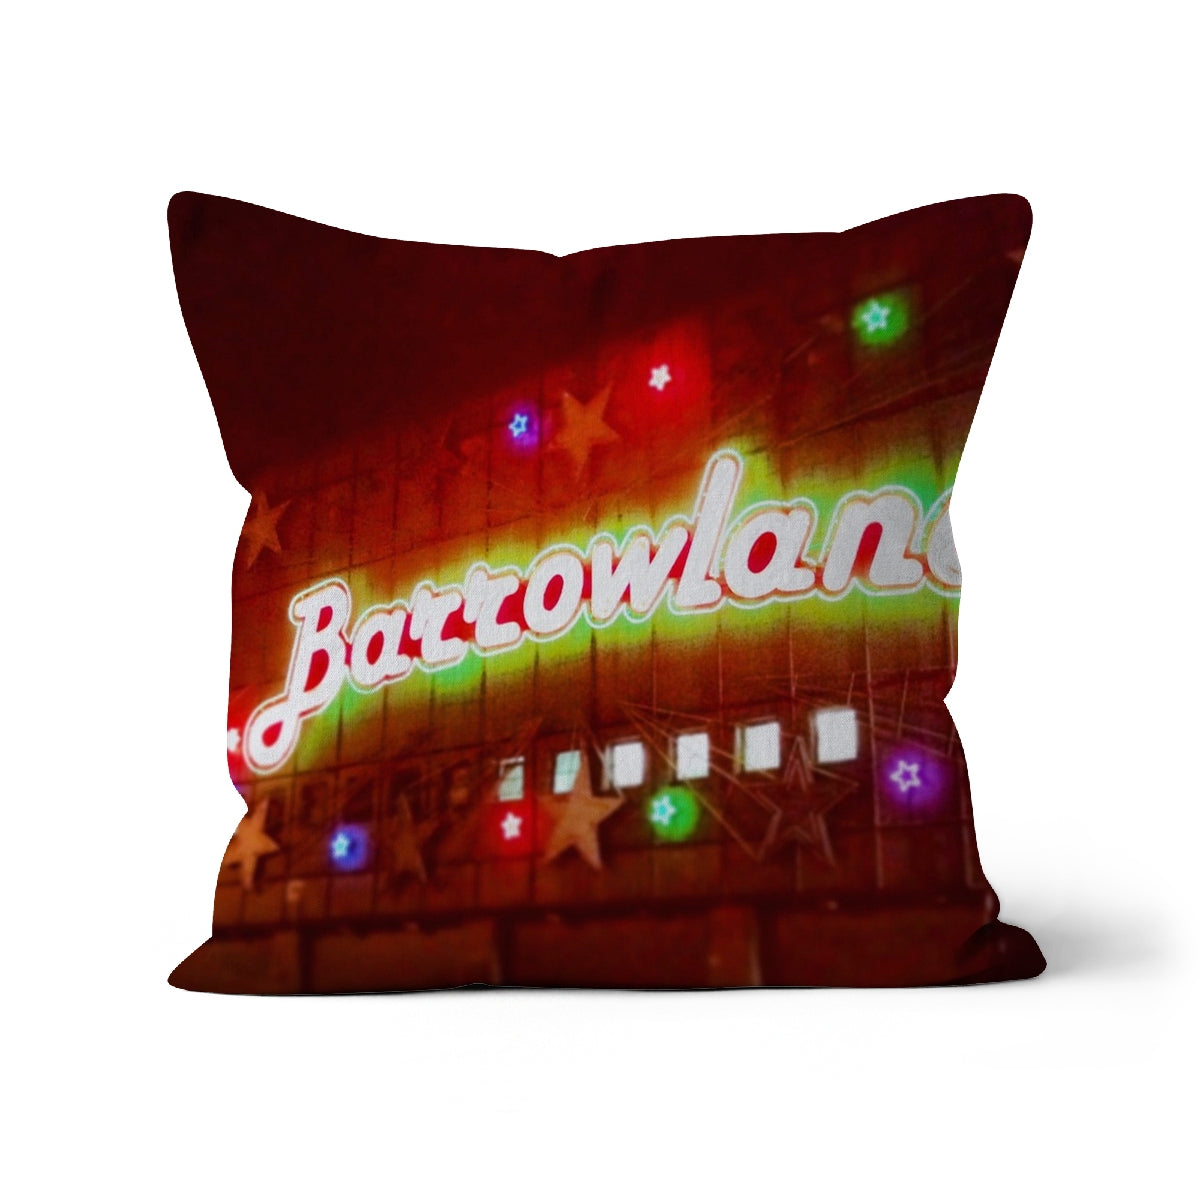 A Neon Glasgow Barrowlands Art Gifts Cushion-Cushions-Edinburgh & Glasgow Art Gallery-Faux Suede-12"x12"-Paintings, Prints, Homeware, Art Gifts From Scotland By Scottish Artist Kevin Hunter